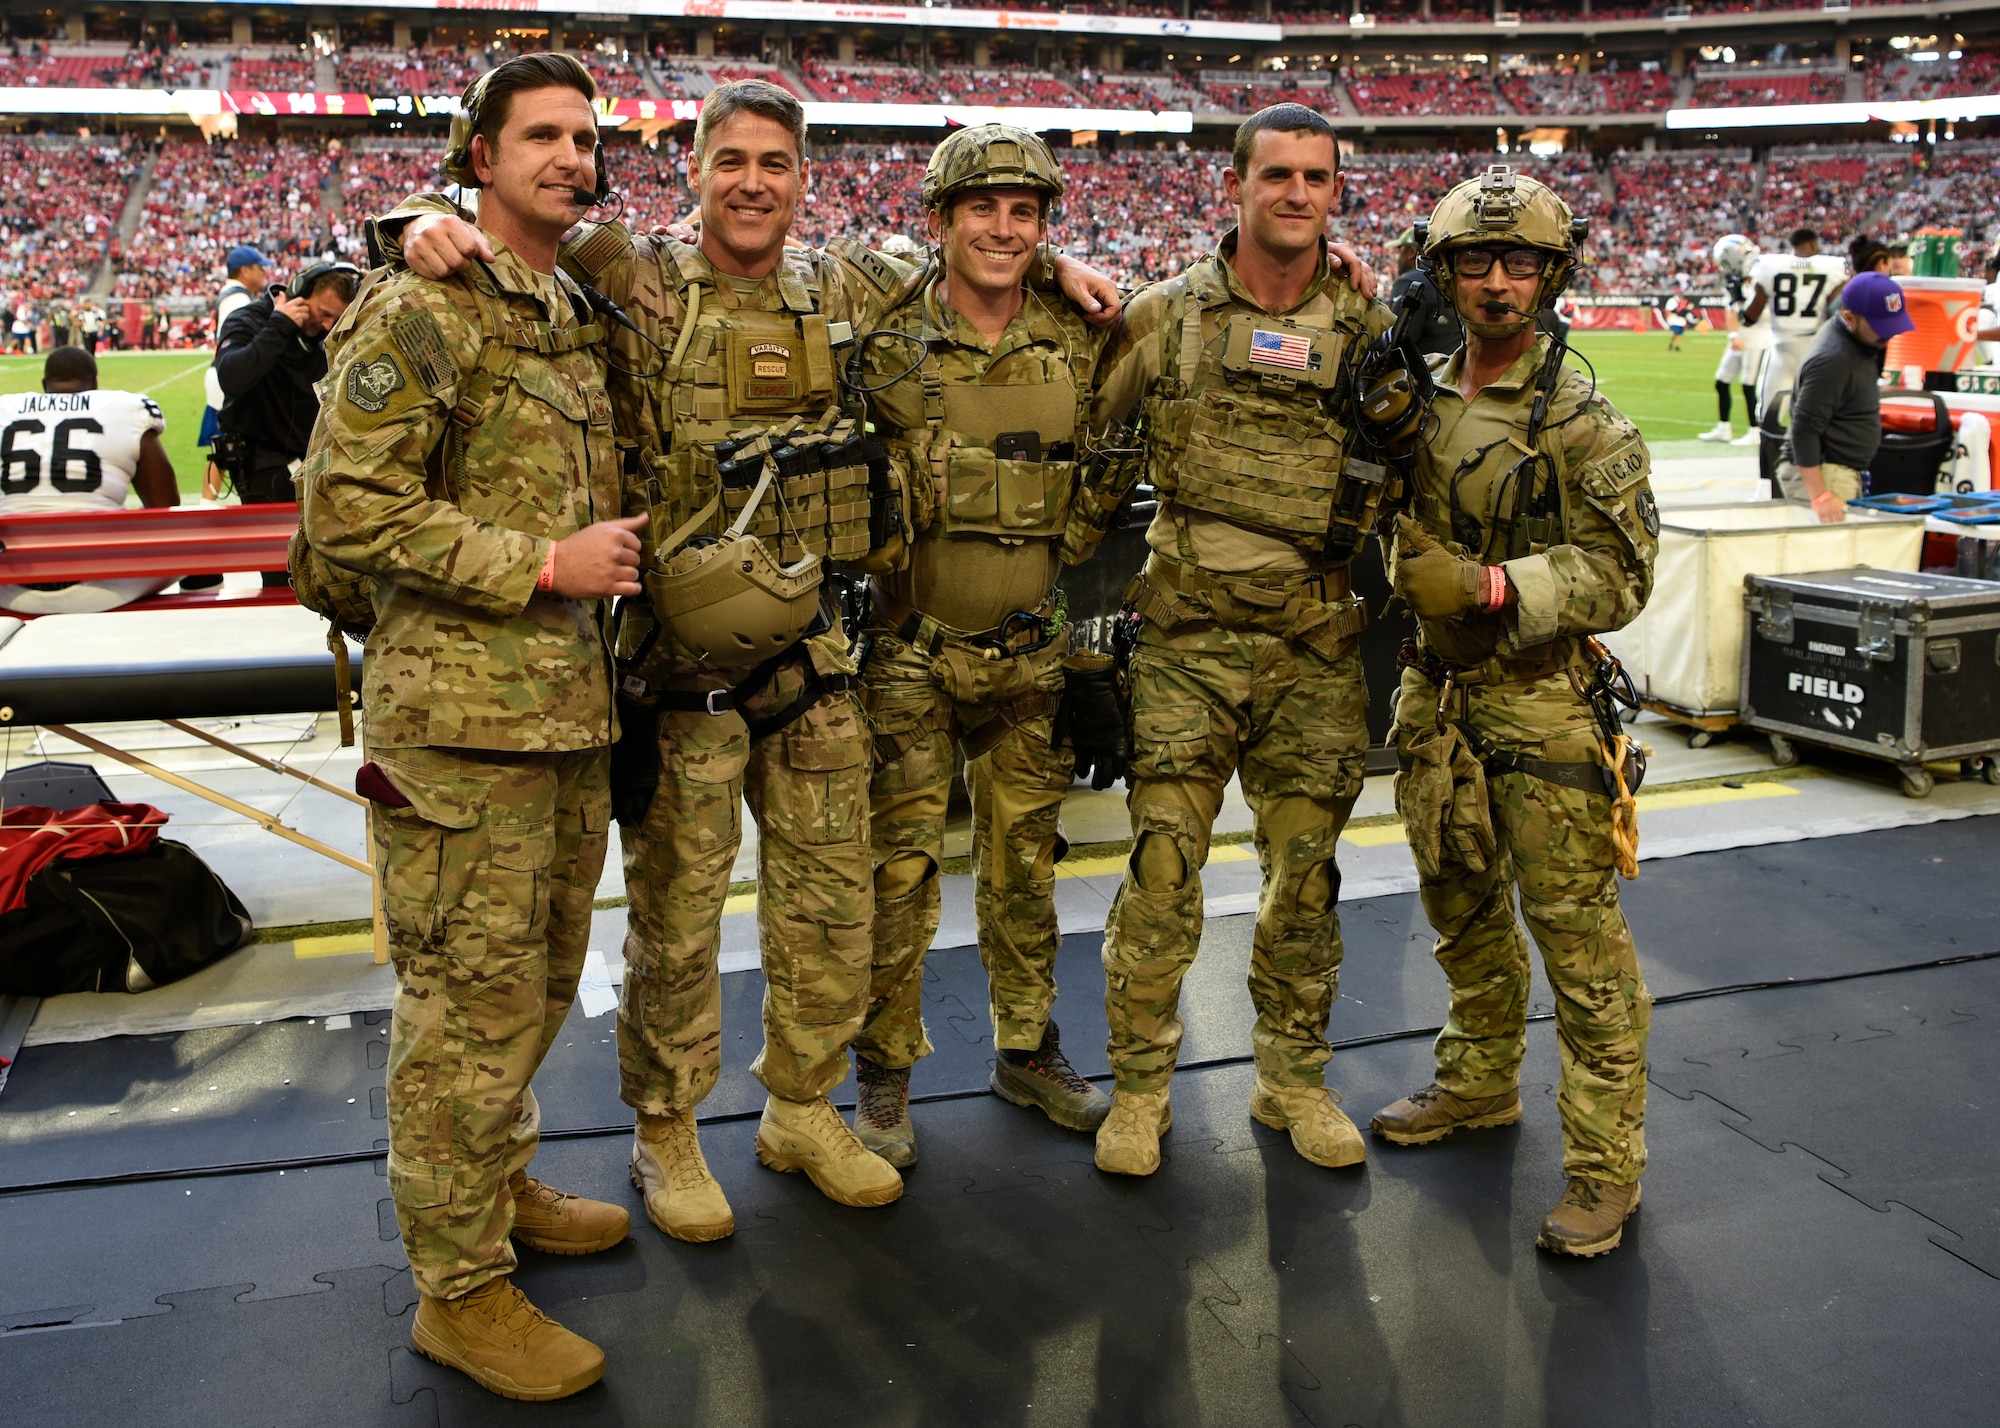 Chief Master Sgt. Ronald Thompson, 56th Fighter Wing command chief, poses for a picture with members of the 306th and 68th Rescue Squadrons, Davis-Monthan Air Force Base, during the Arizona Cardinals Salute to Service game, Nov. 18, 2018, at State Farm Stadium, Glendale, Ariz.